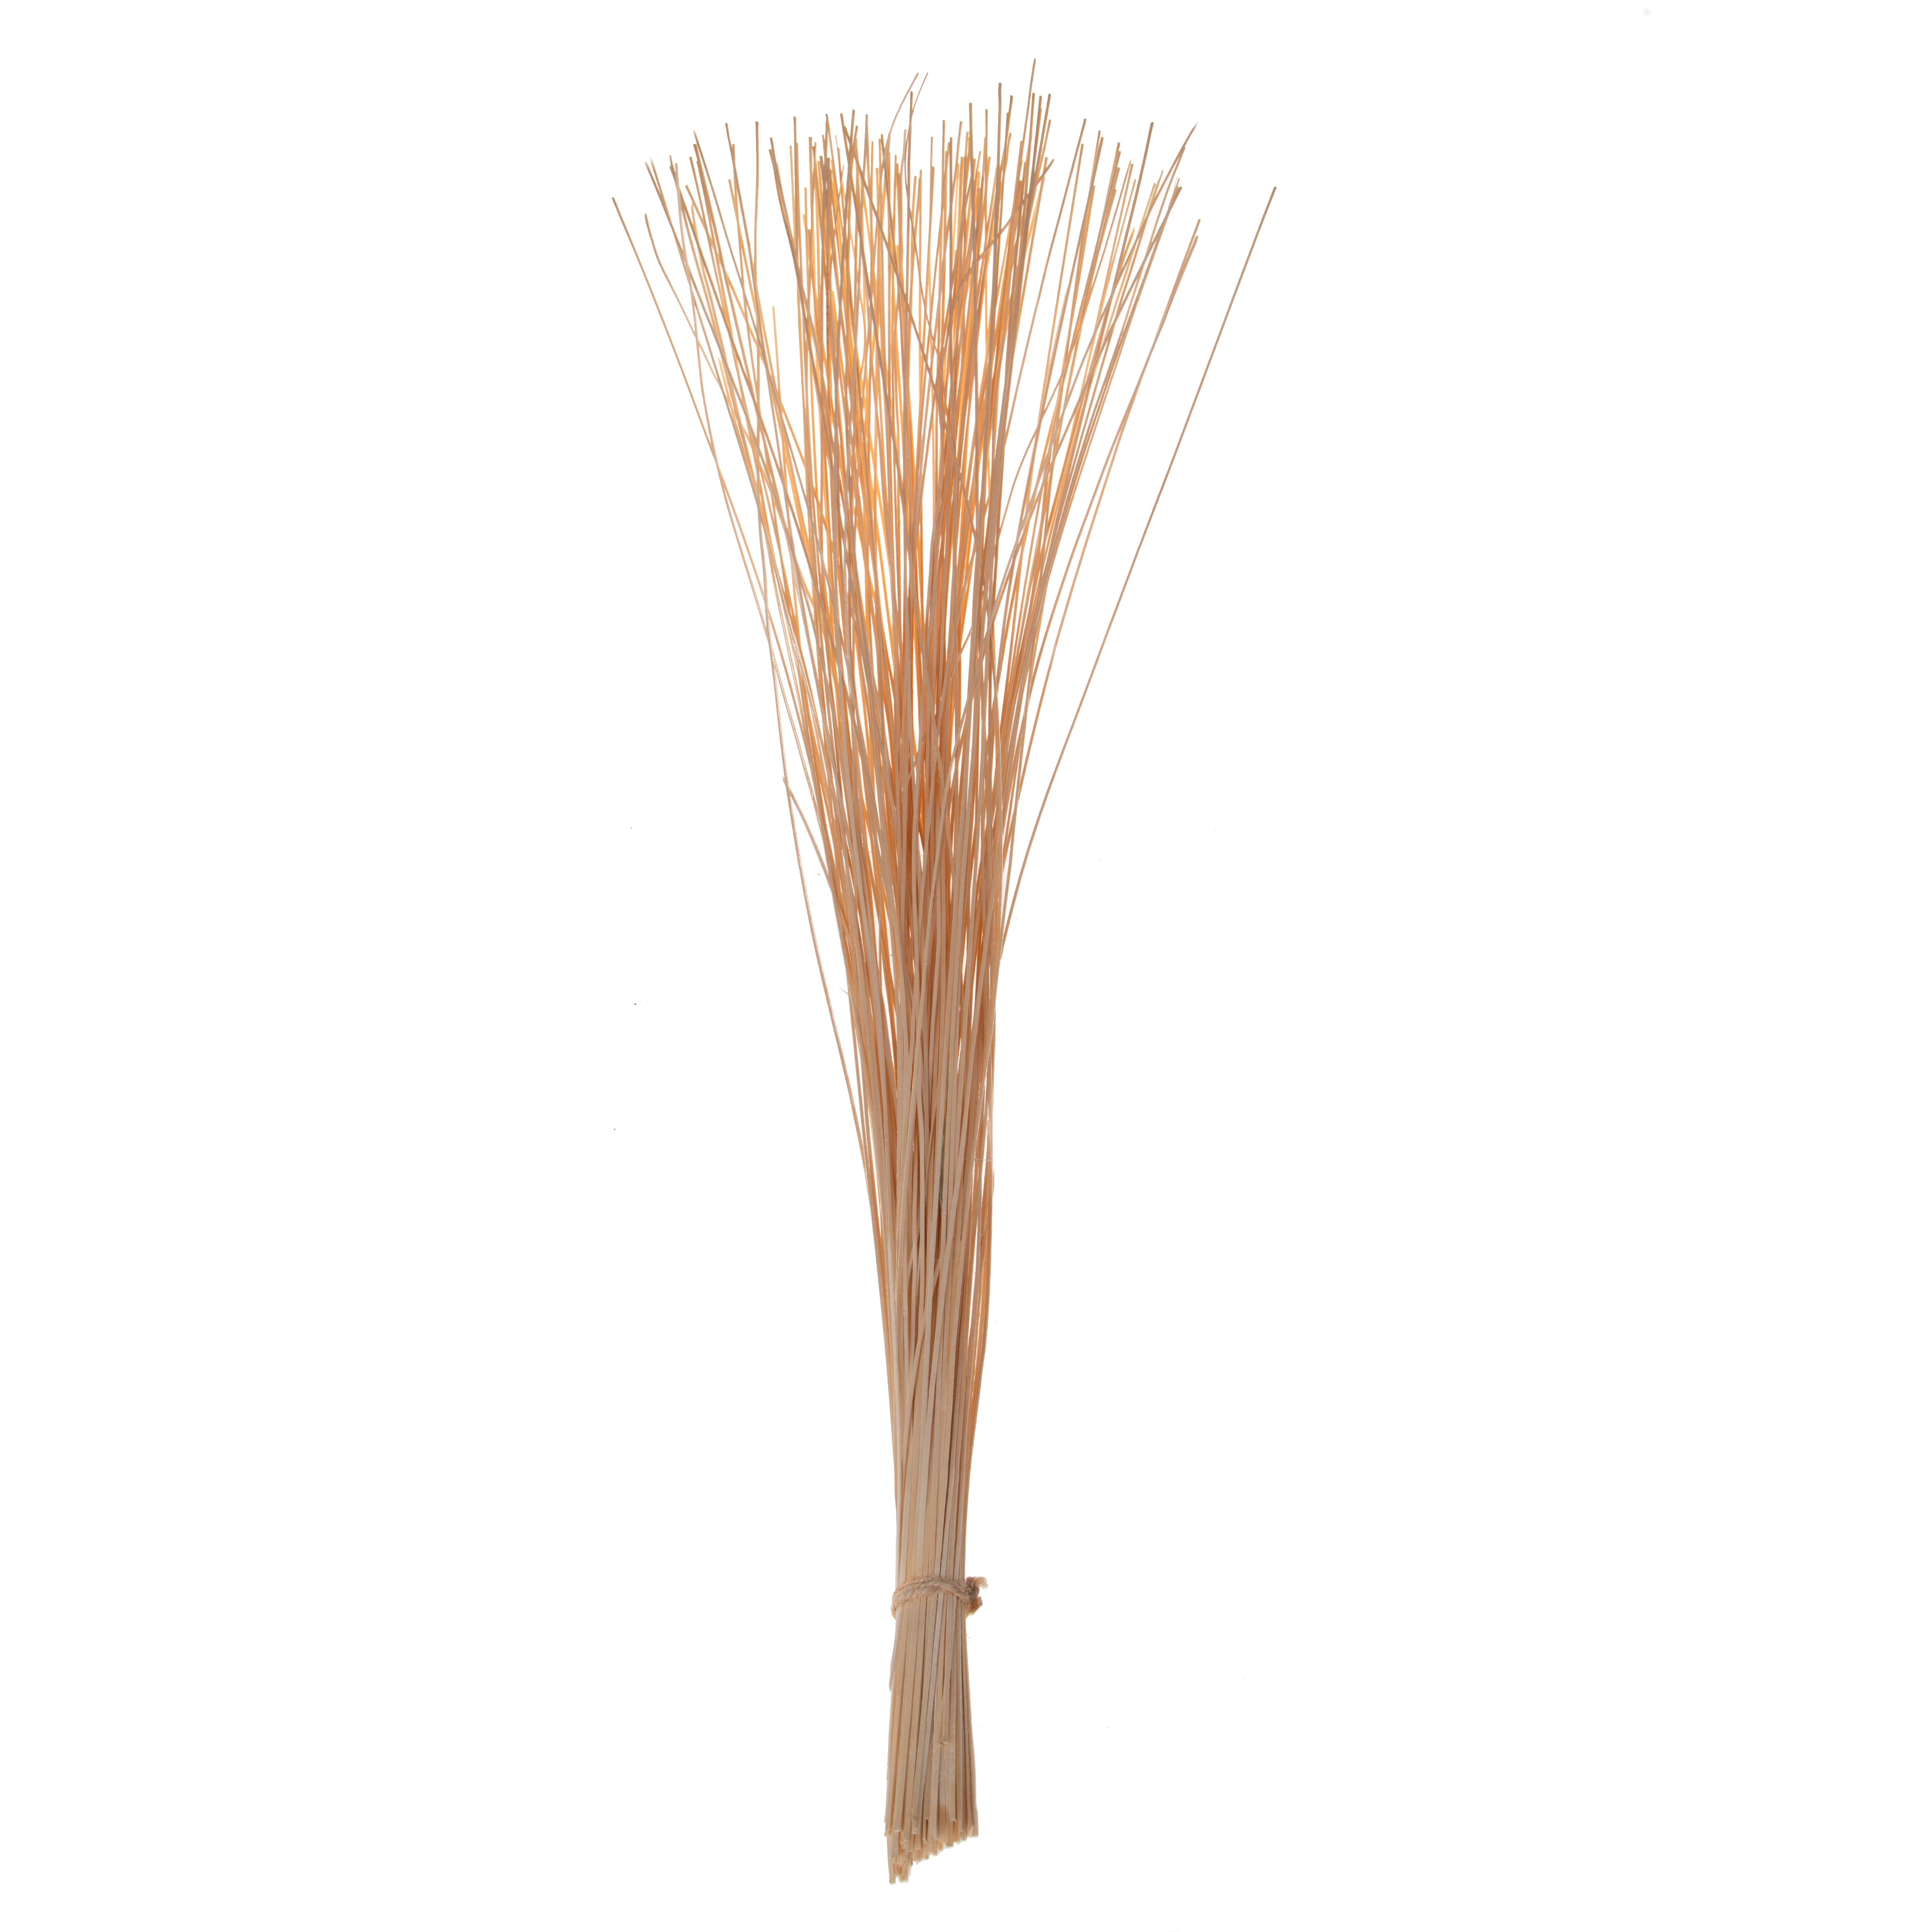 NATURAL PRODUCTS DRIED FLOWERS AND ERBS,LEGNO STRISCE 130 cm